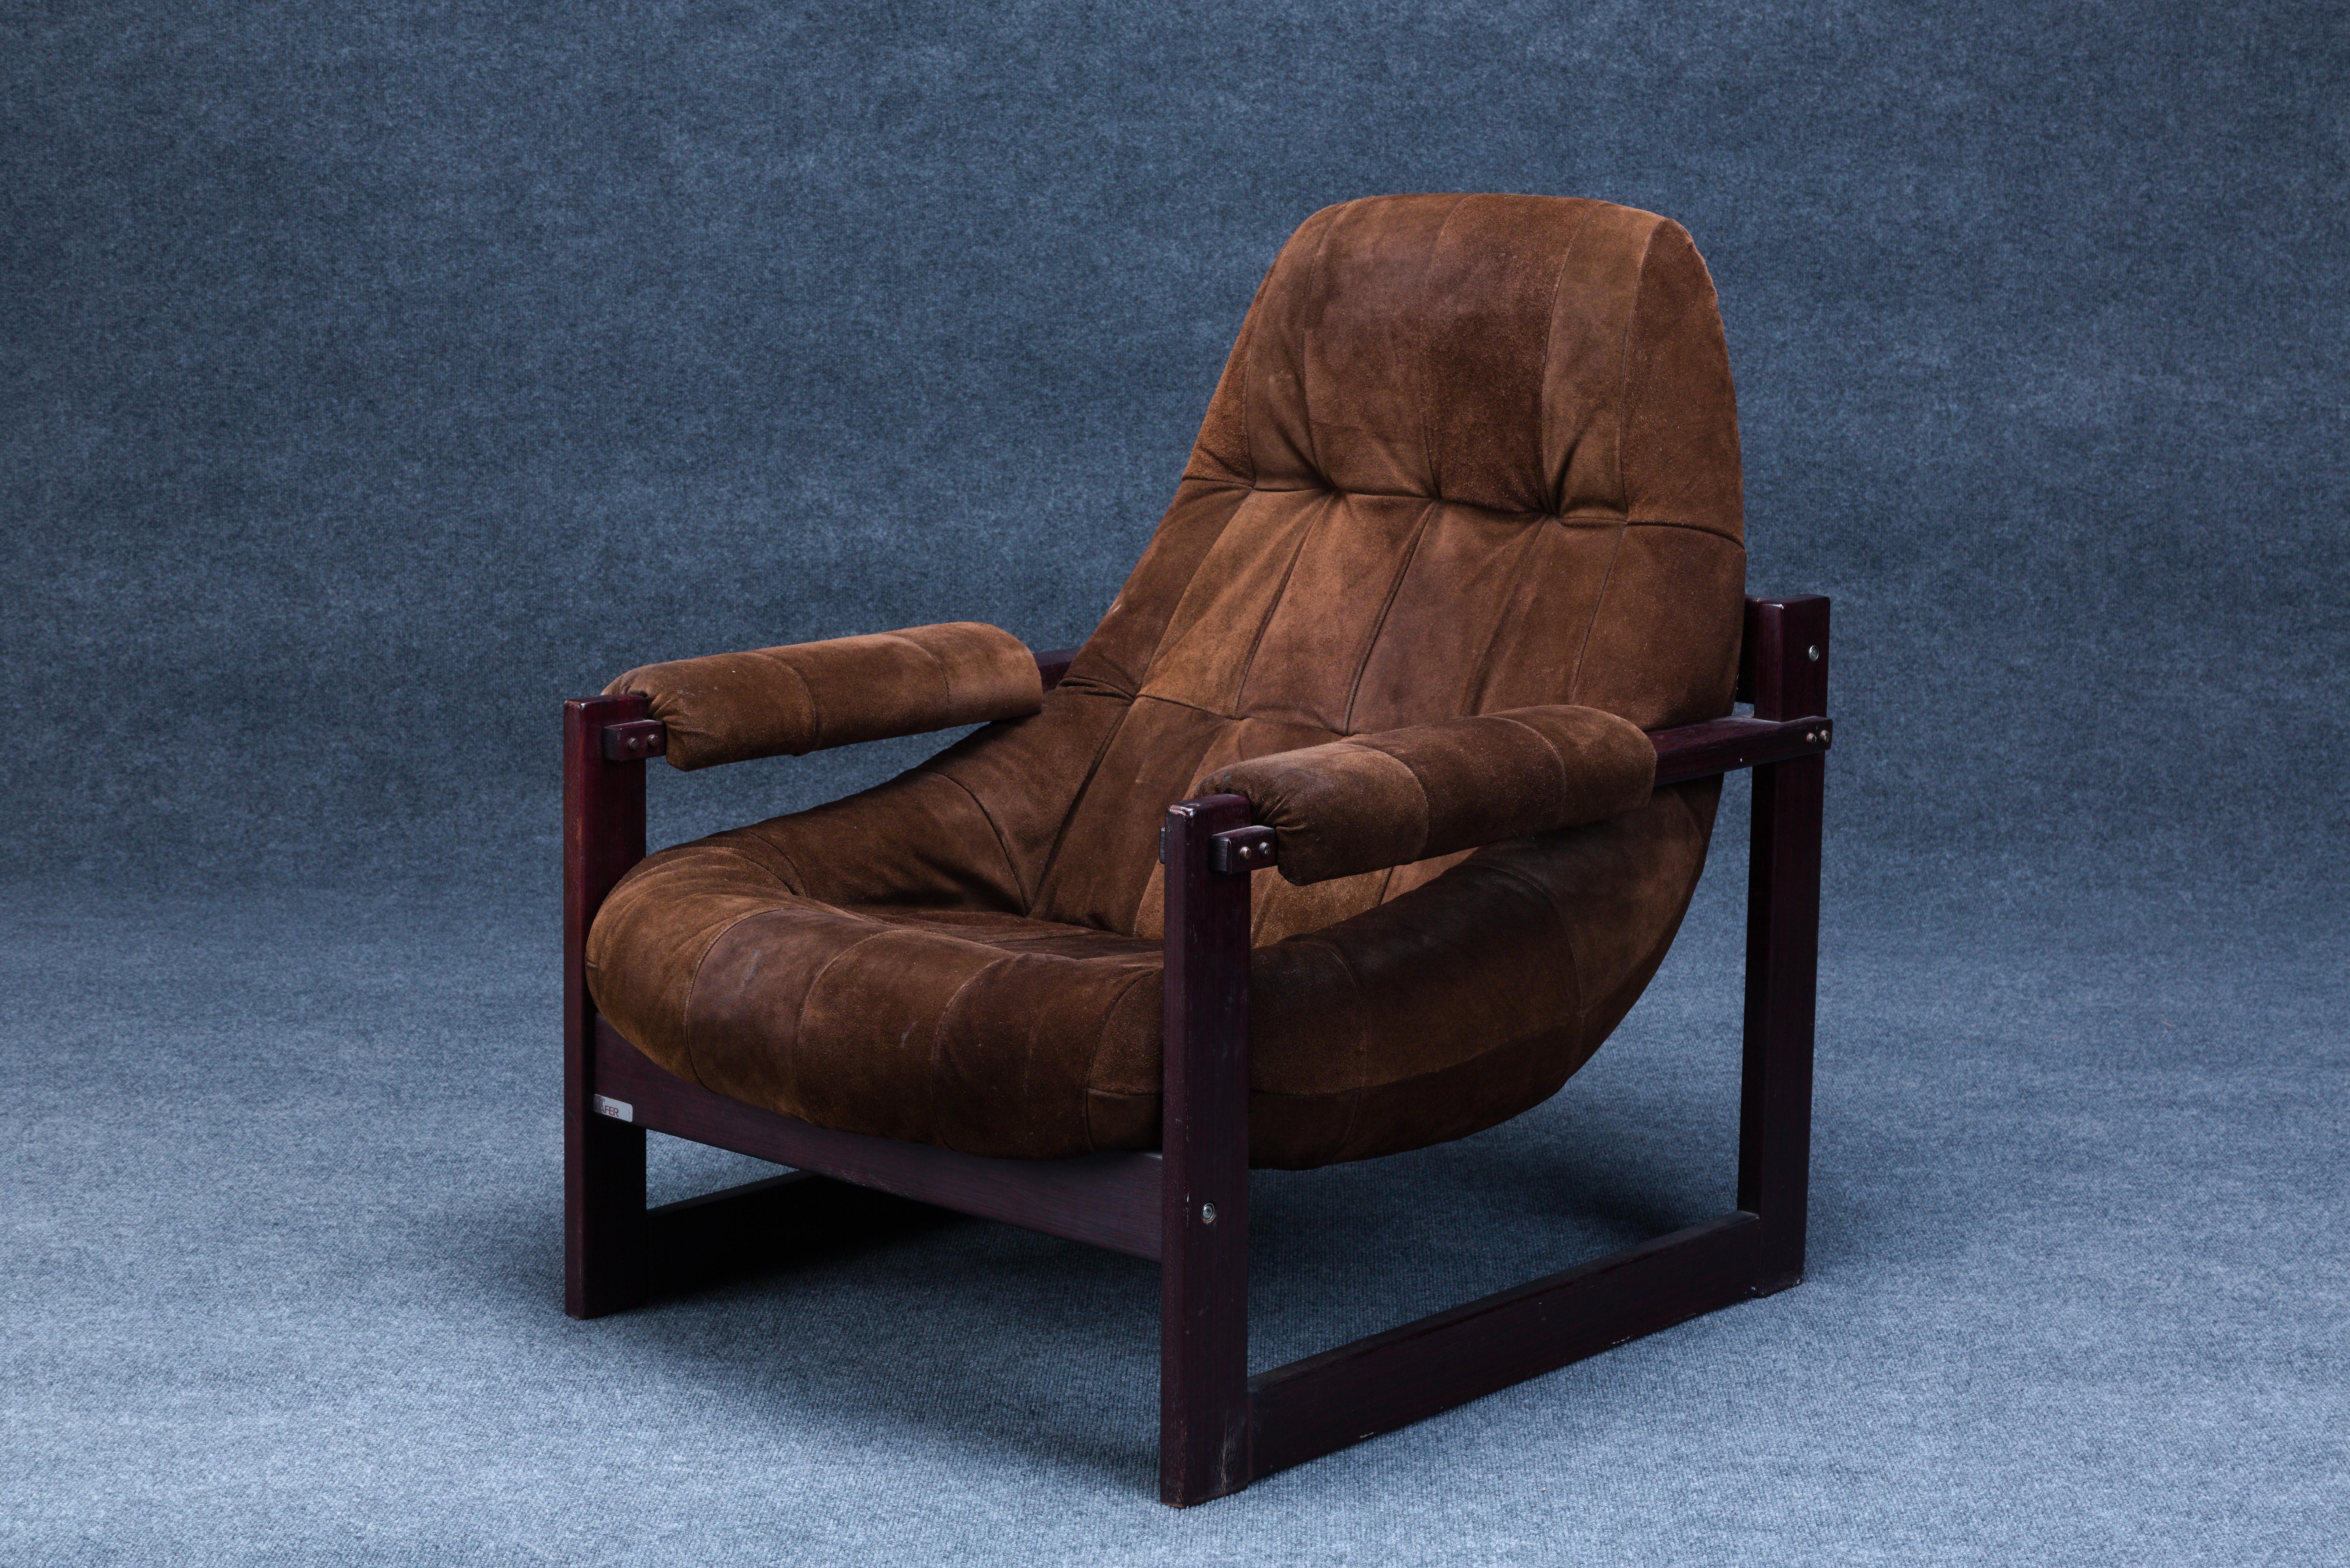 Brazilian Mid-Century Modern Armchair/Ottoman by Percival Lafer in Suede Leather For Sale 1